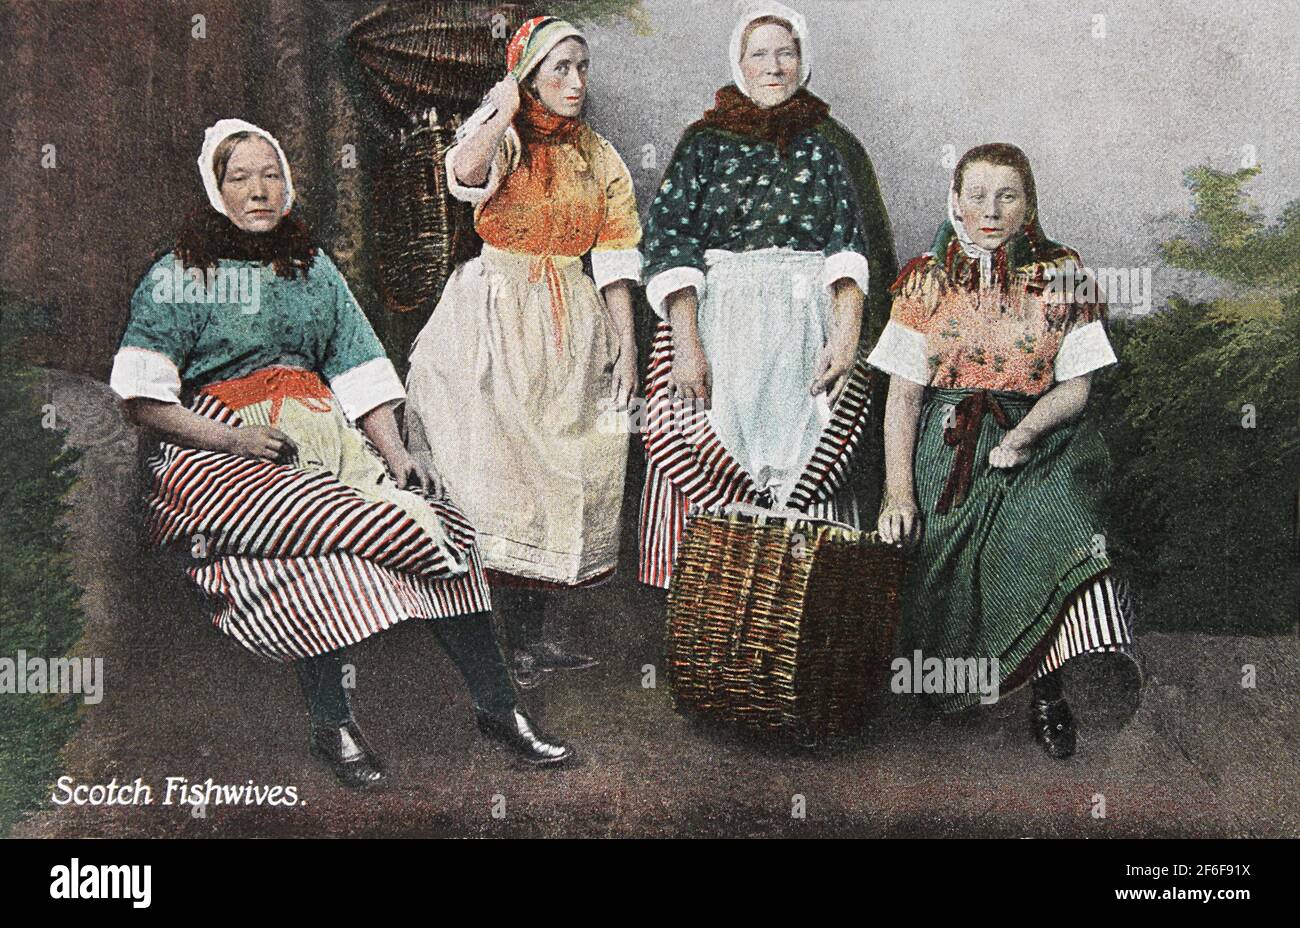 Hand-coloured postcard post-marked 1906 showing Scottish fishwives in a formal group photo. Stock Photo